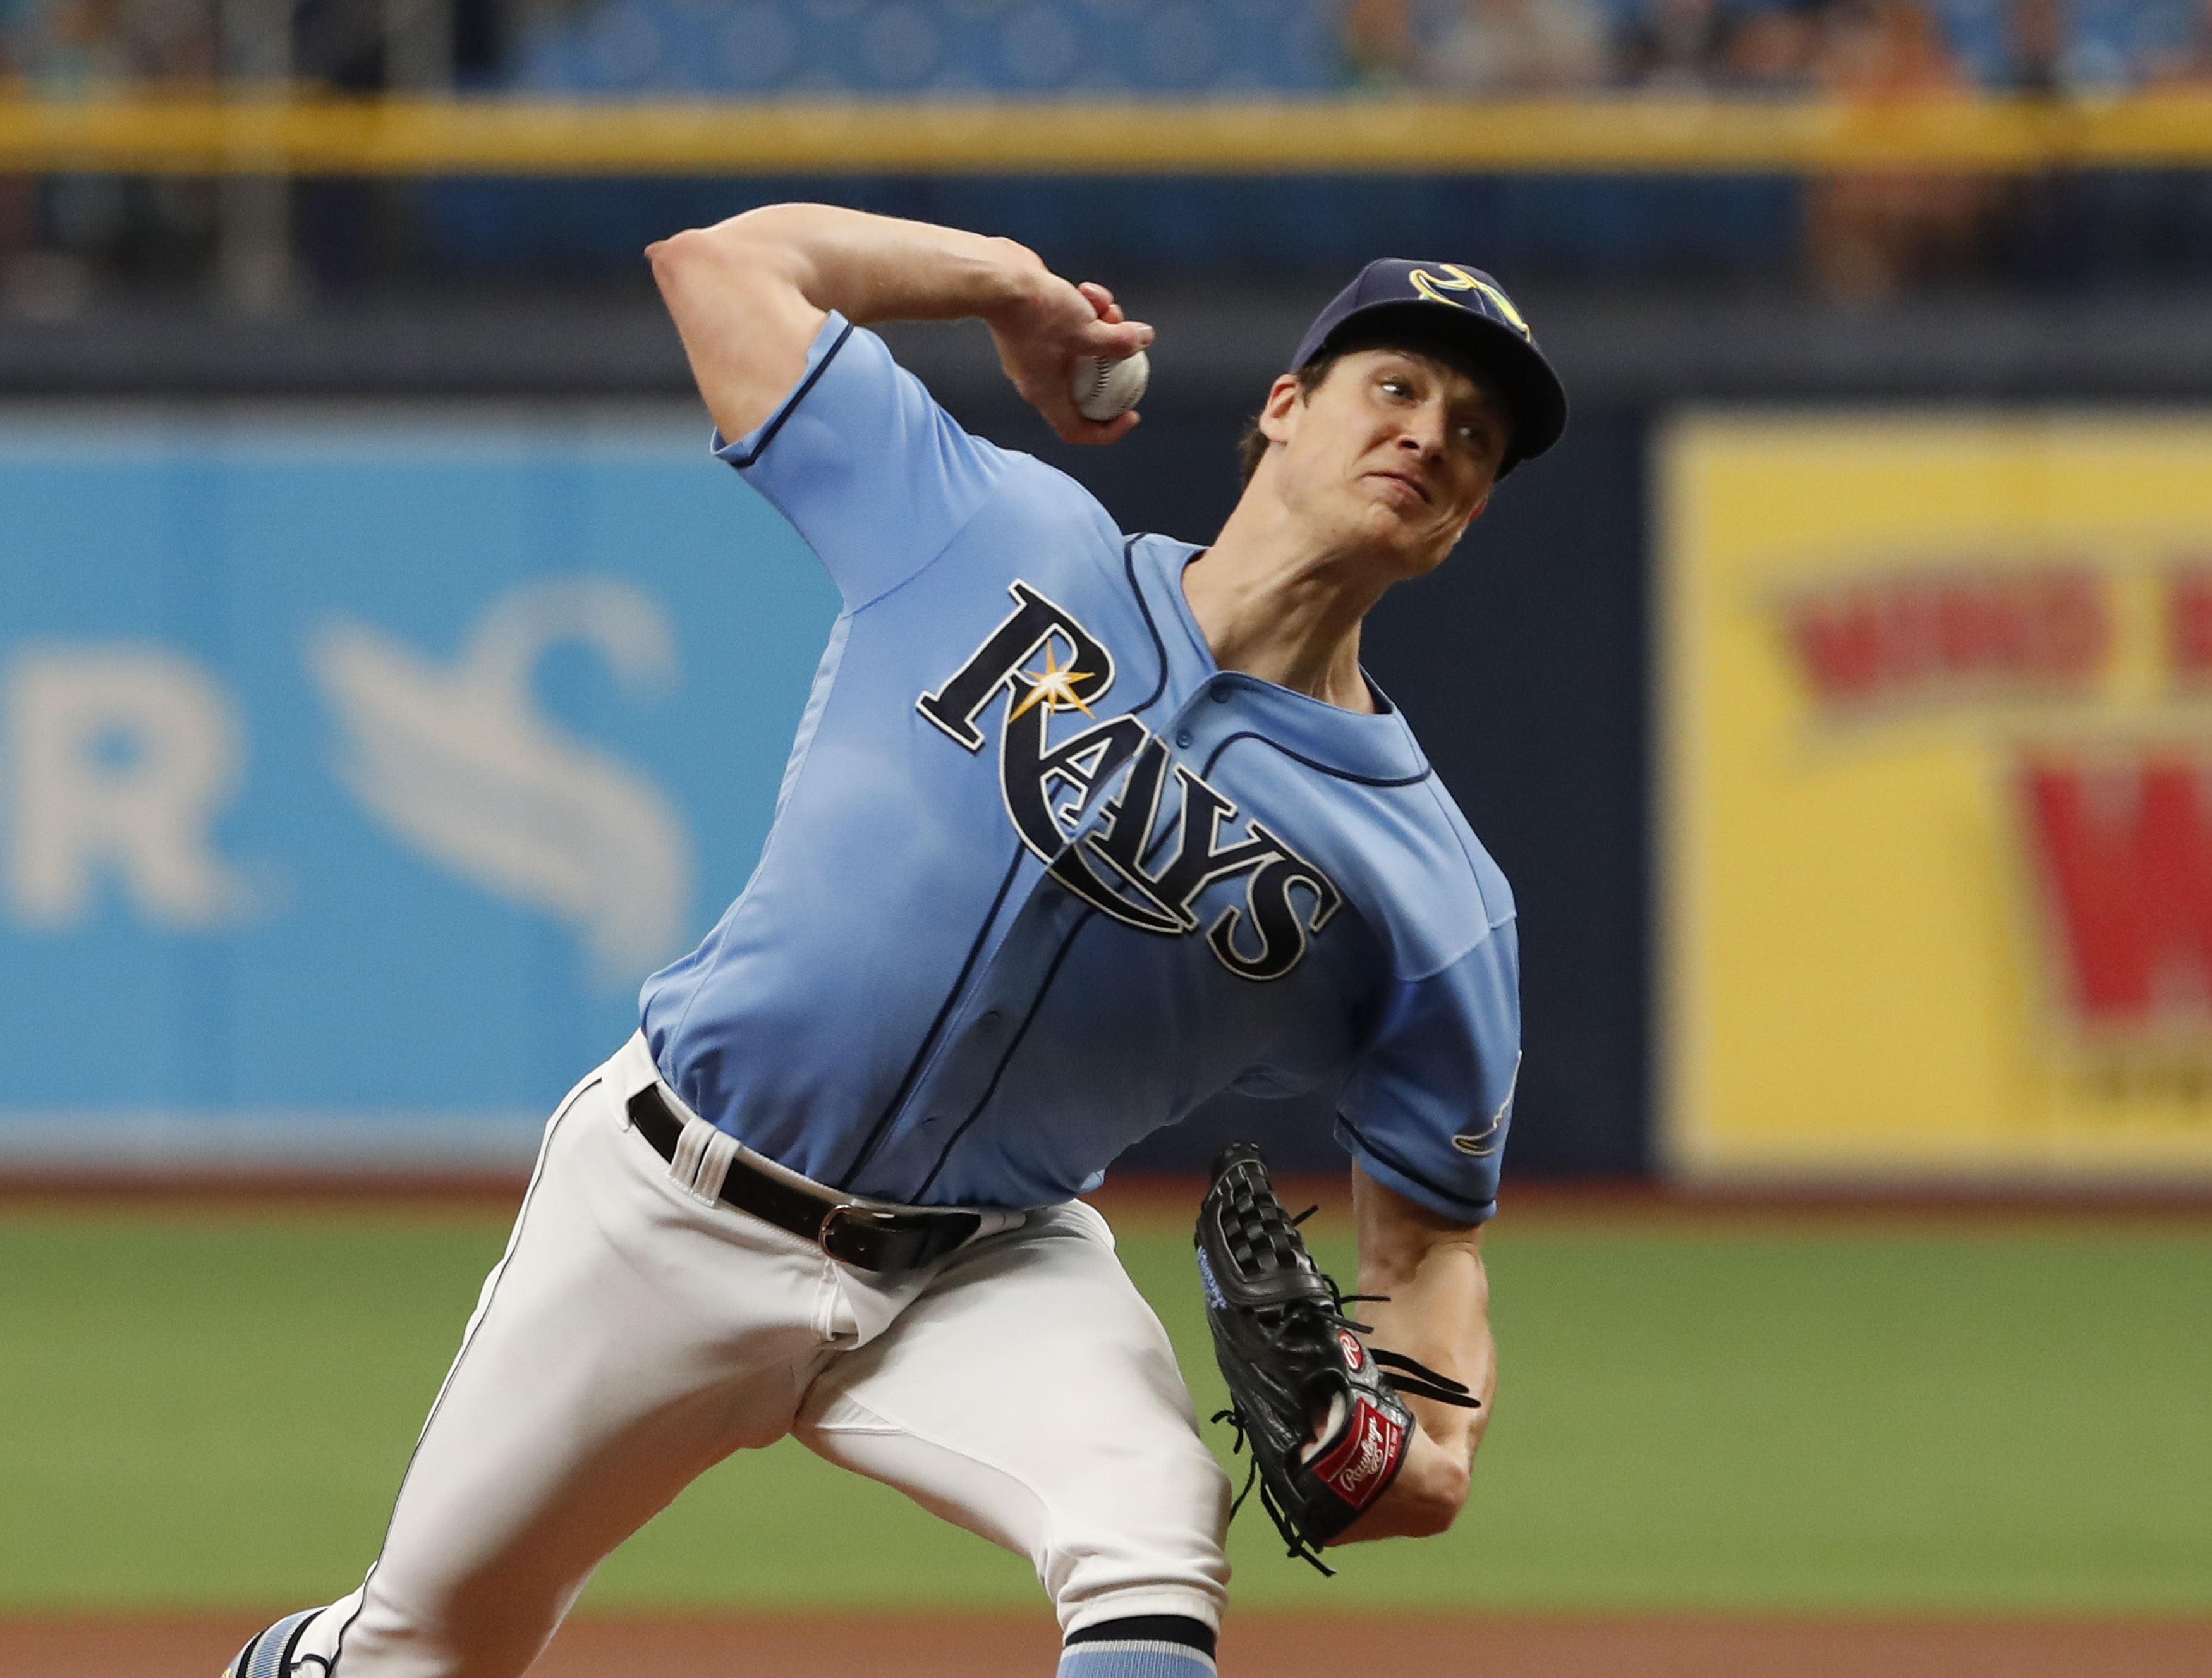 Glasnow strikes out 5 in return, Rays beat sinking Blue Jays